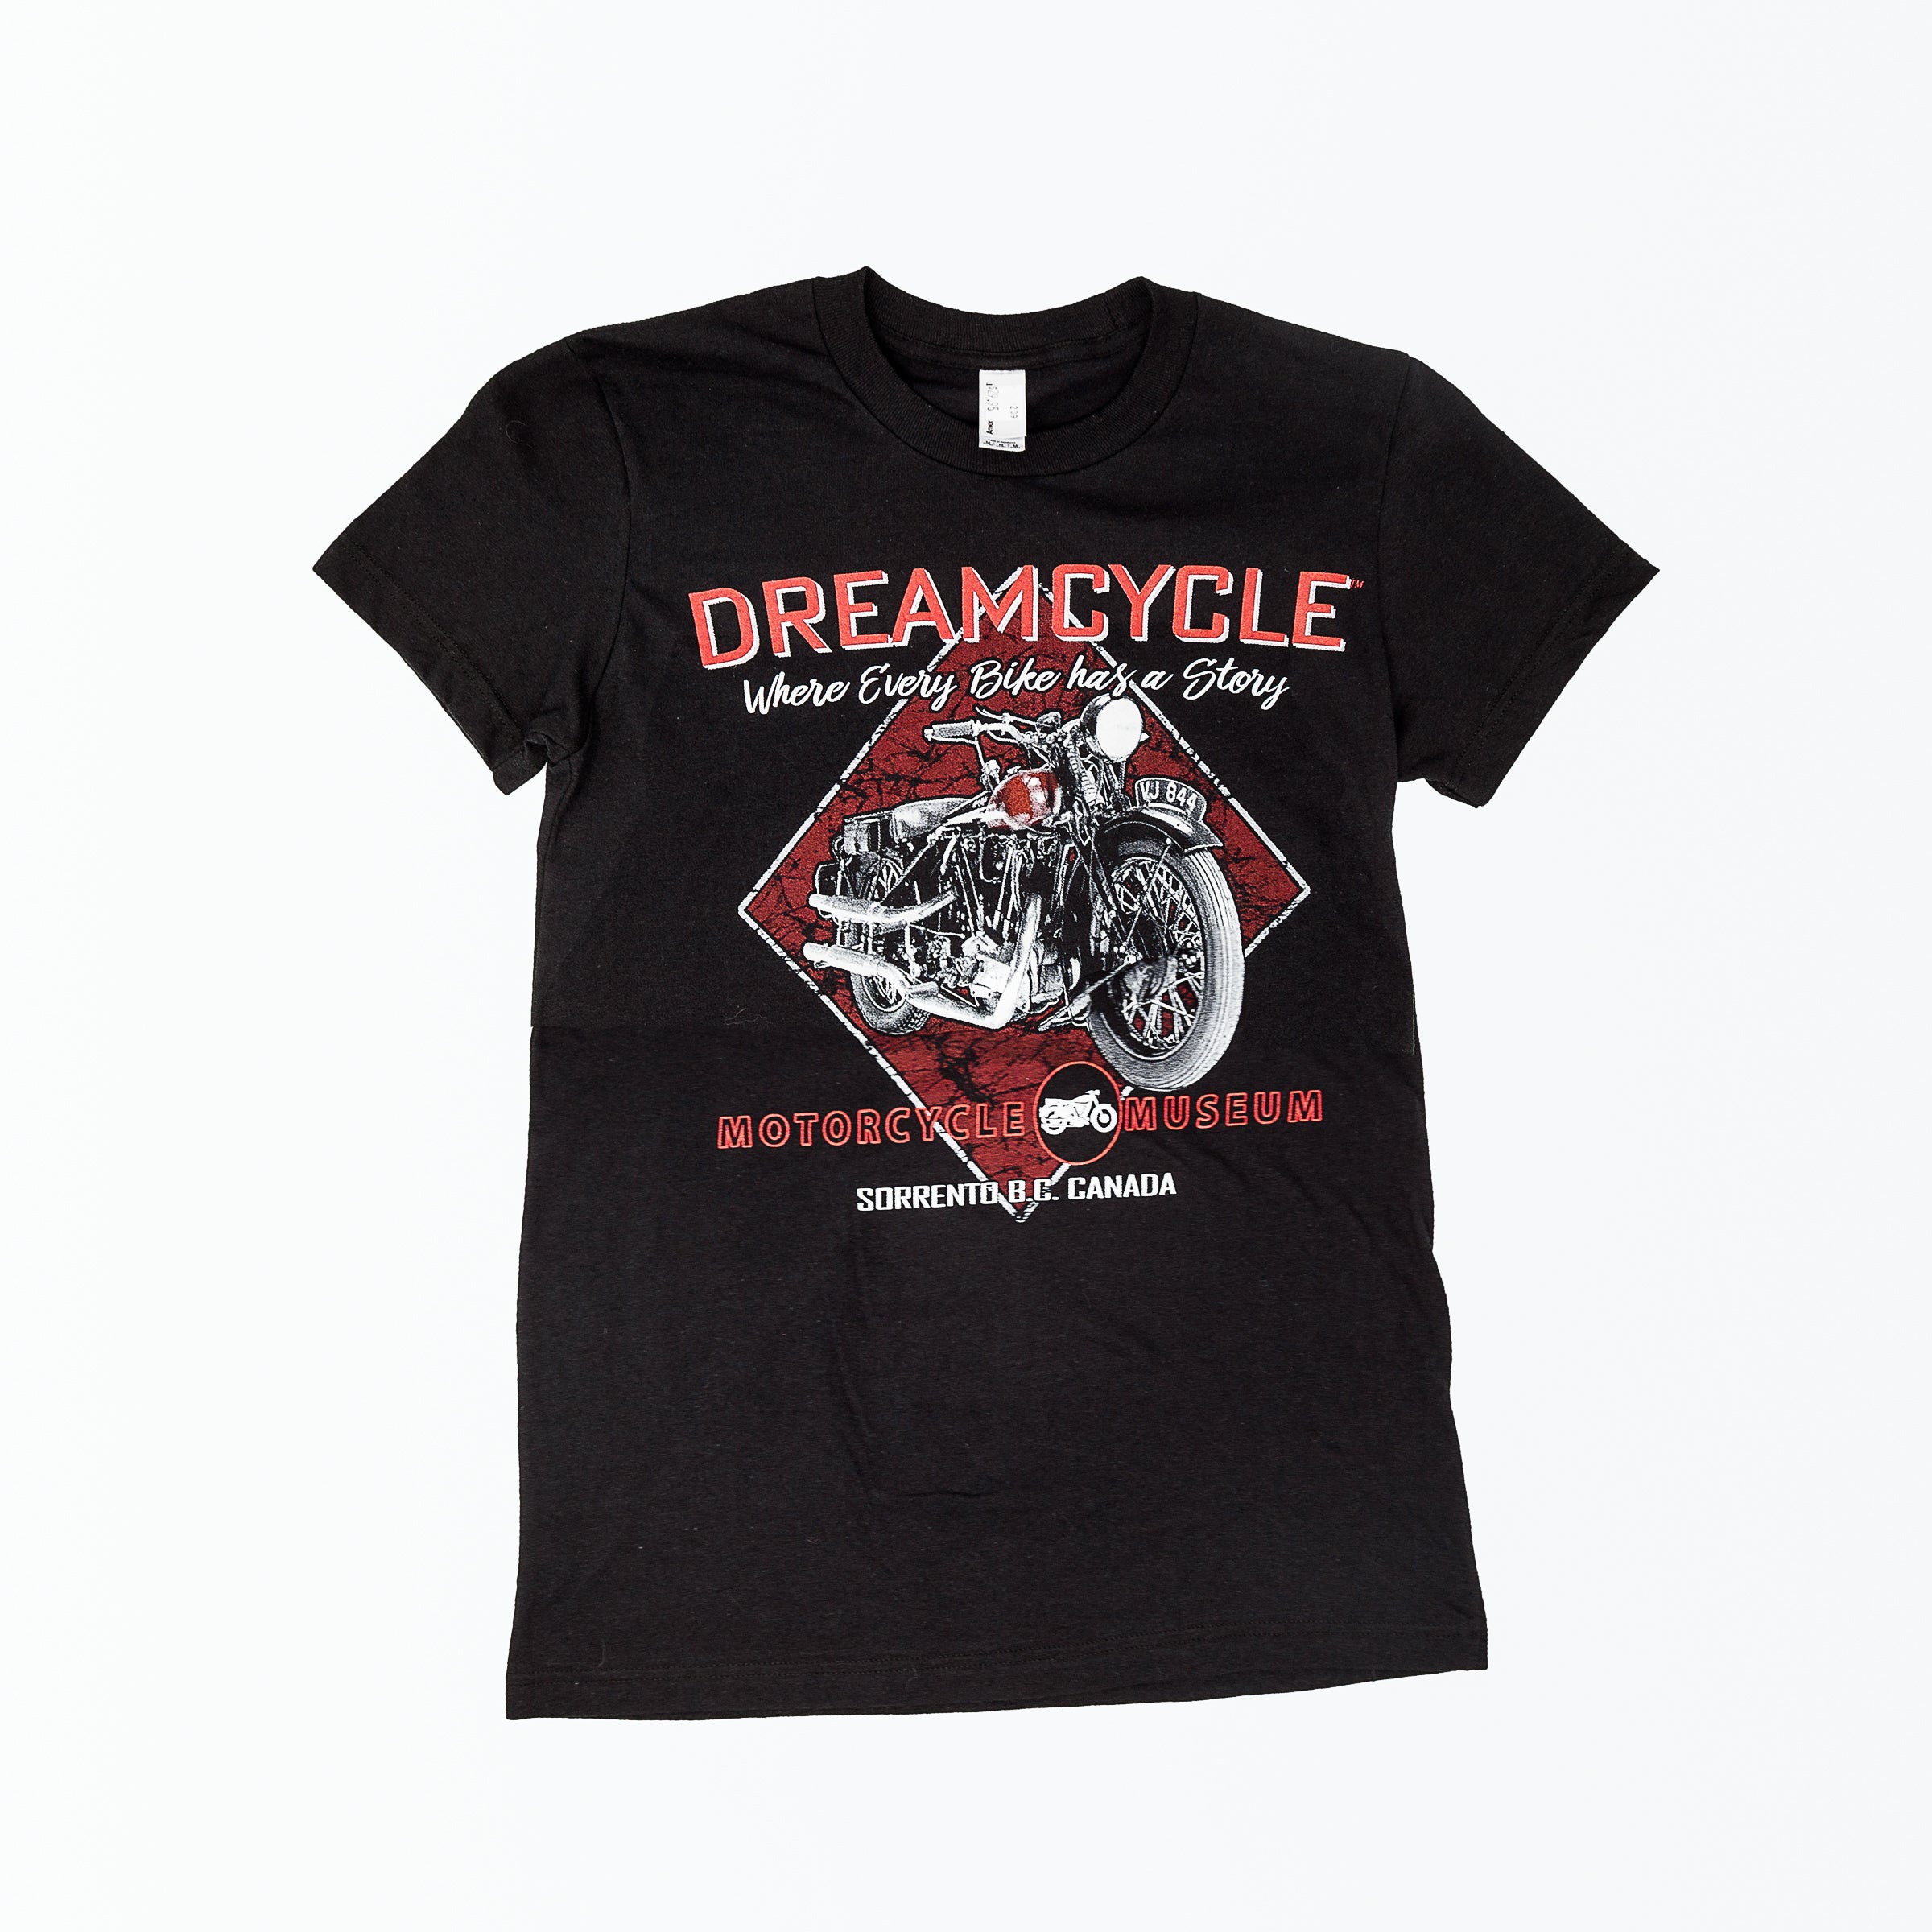 Dreamcycle Motorcycle Museum |  "Dreamcyce" Tshirt on white background.